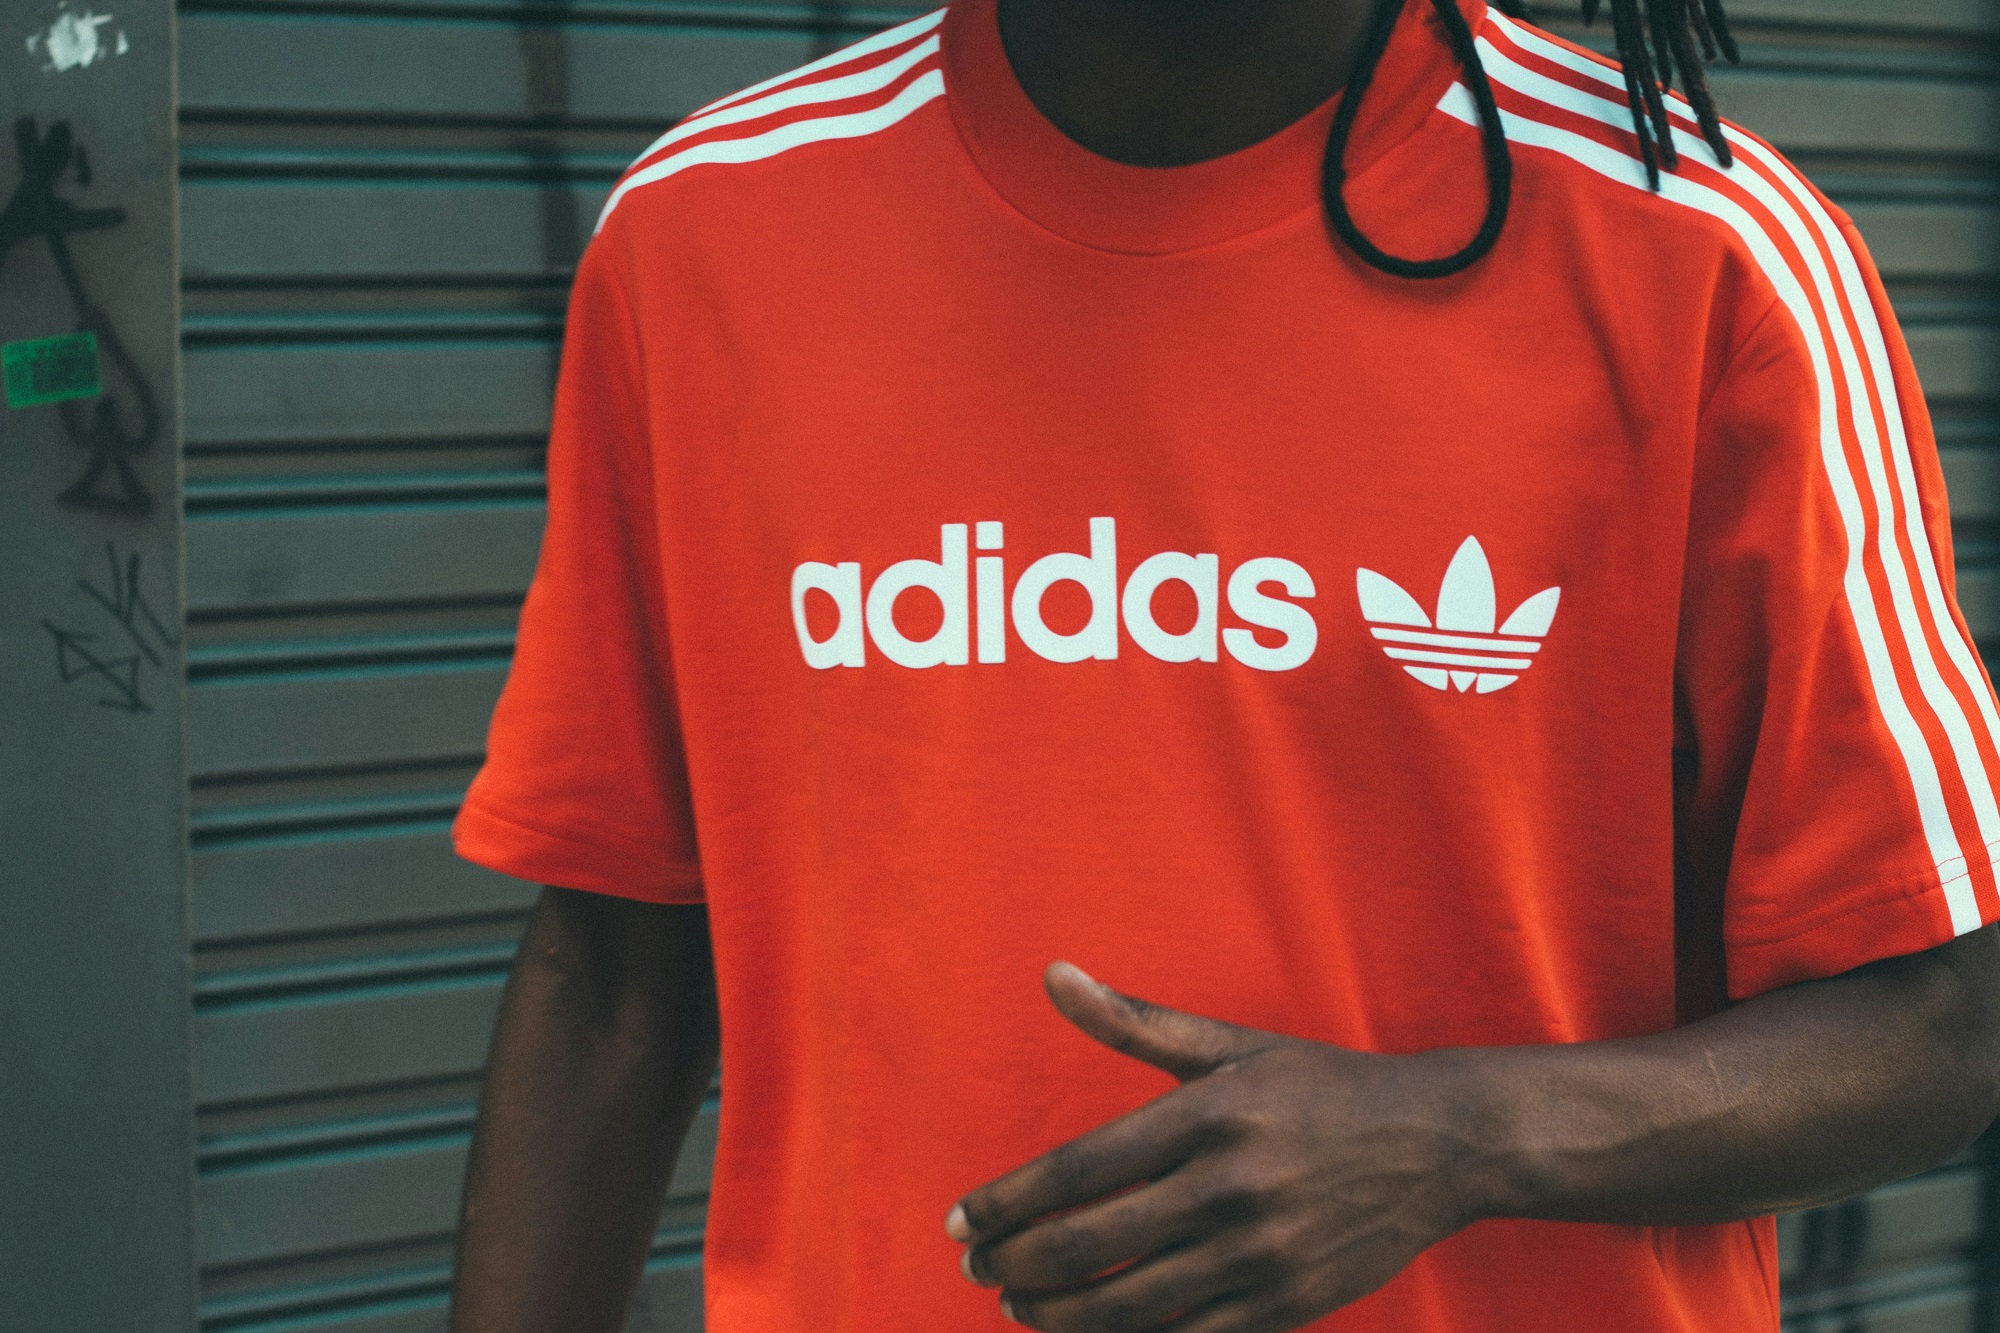 “From the Field to the Street: The Evolution of Adidas Performance Apparel”